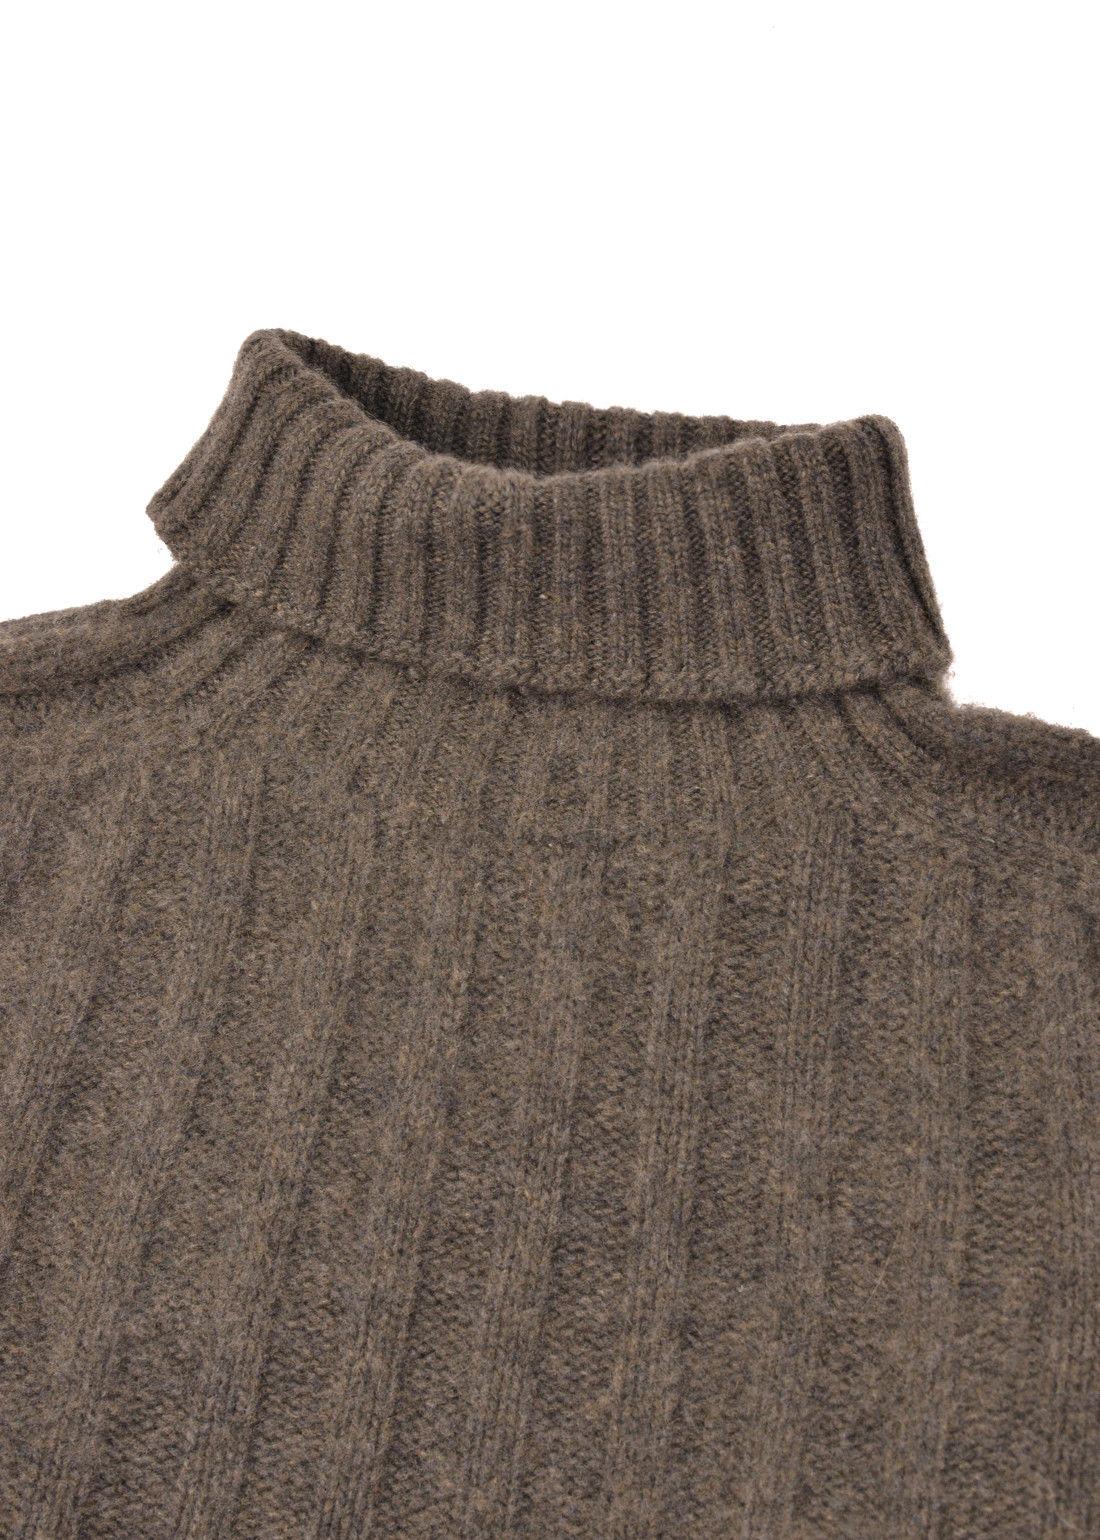 Tom Ford's luxurious turtle neck sweater with a rib knit woven design. This classic Tom Ford turtleneck sweater is crafted from soft cashmere for a gentle and luxurious feel to the skin. Perfect for this winter and fall season, pair with regular